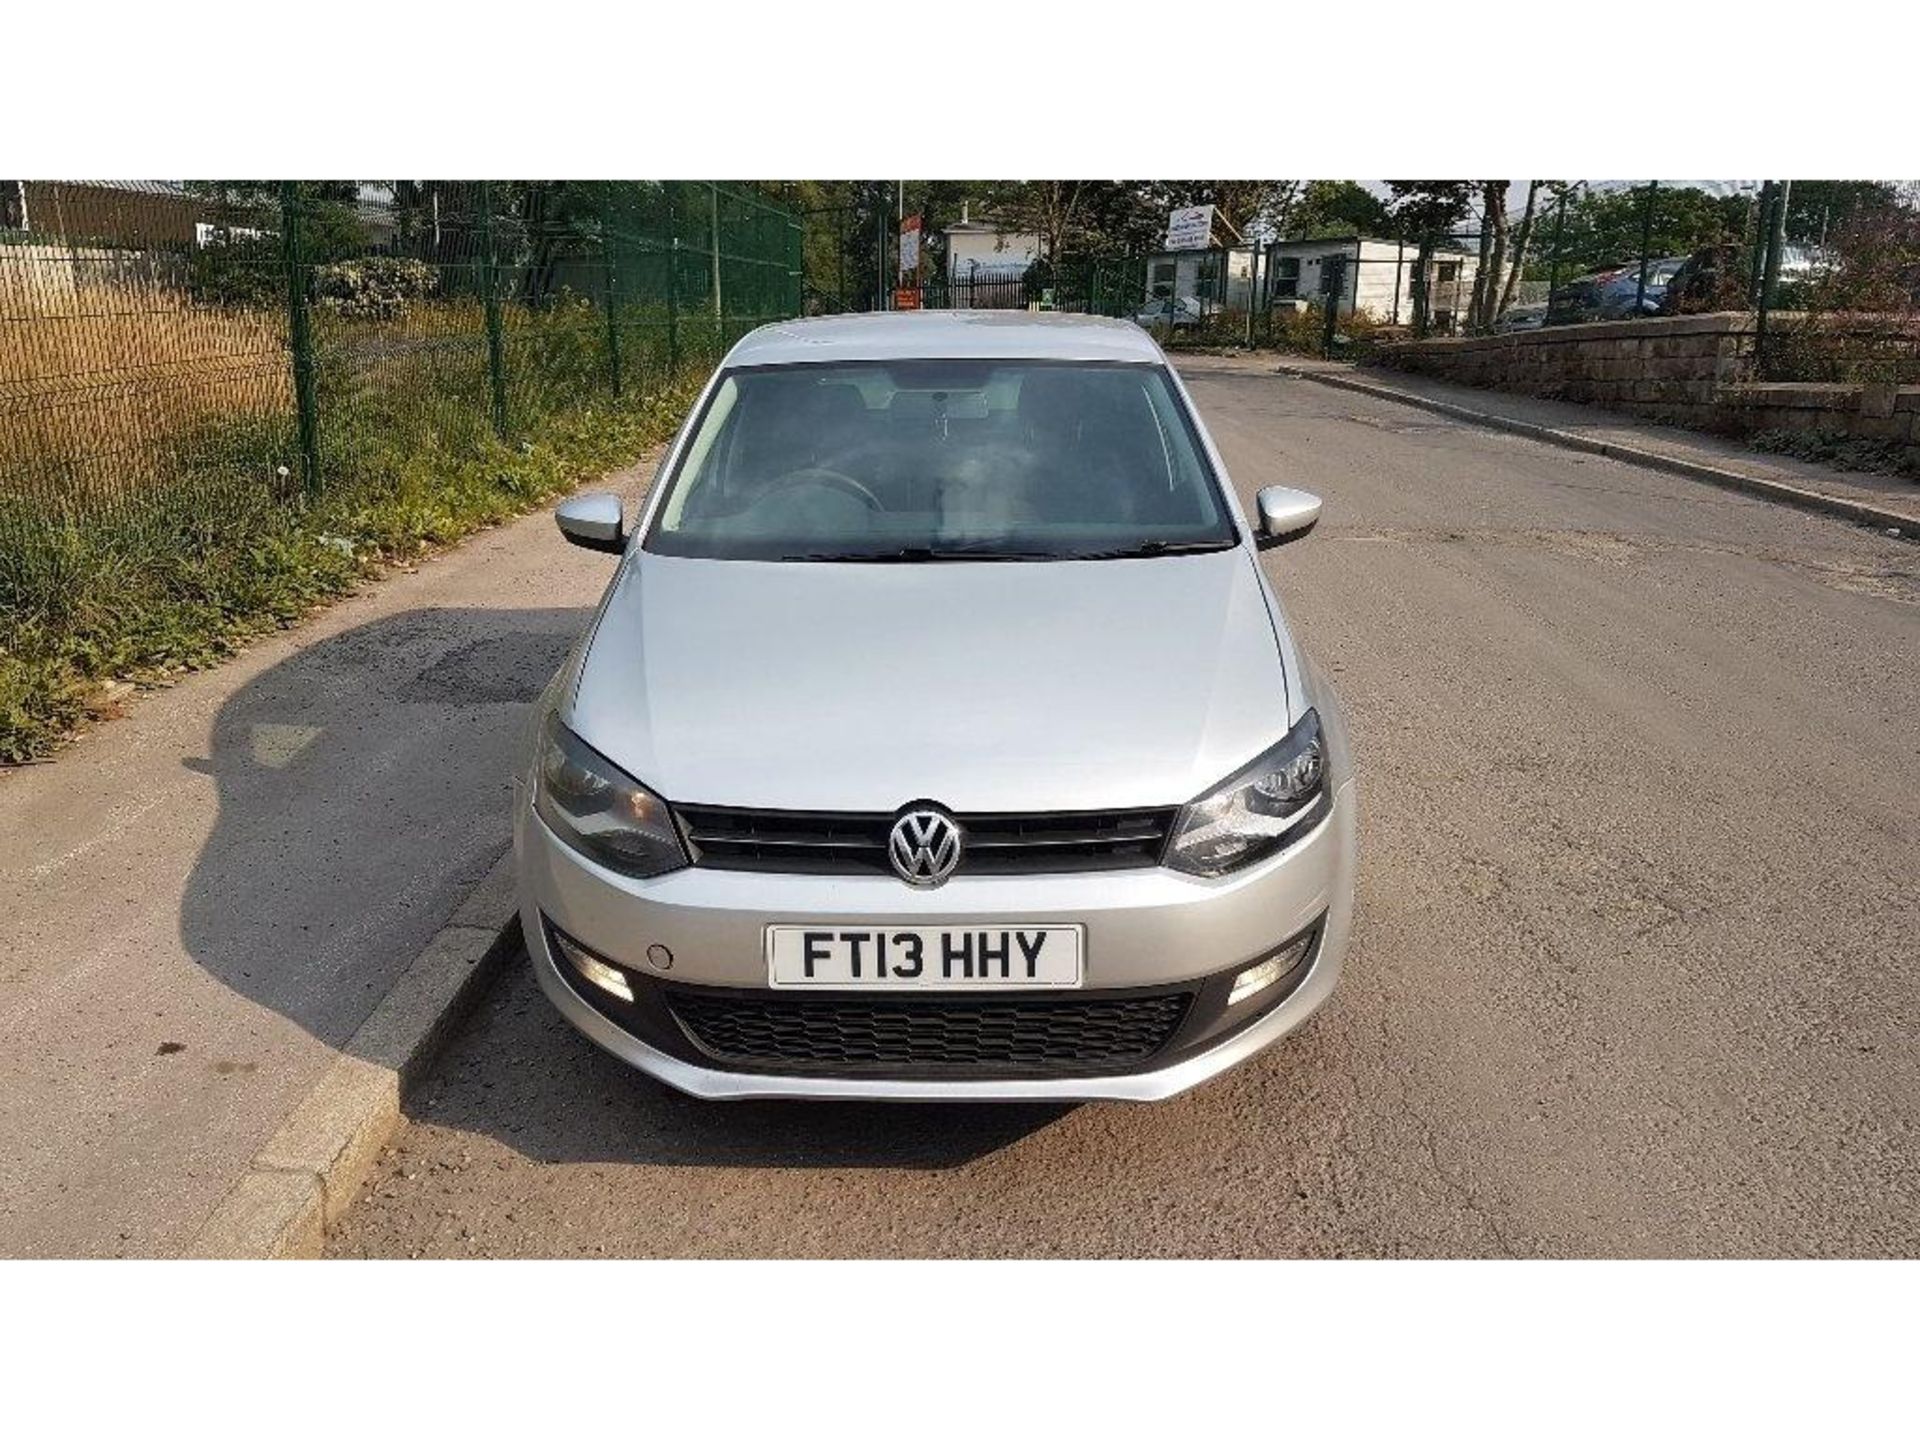 VOLKSWAGEN POLO 1.2 MATCH EDITION 5DR, FT13 HHY, 20.05.2013, PETROL, MILEAGE 28,499, MANUAL, 1.2L, 2